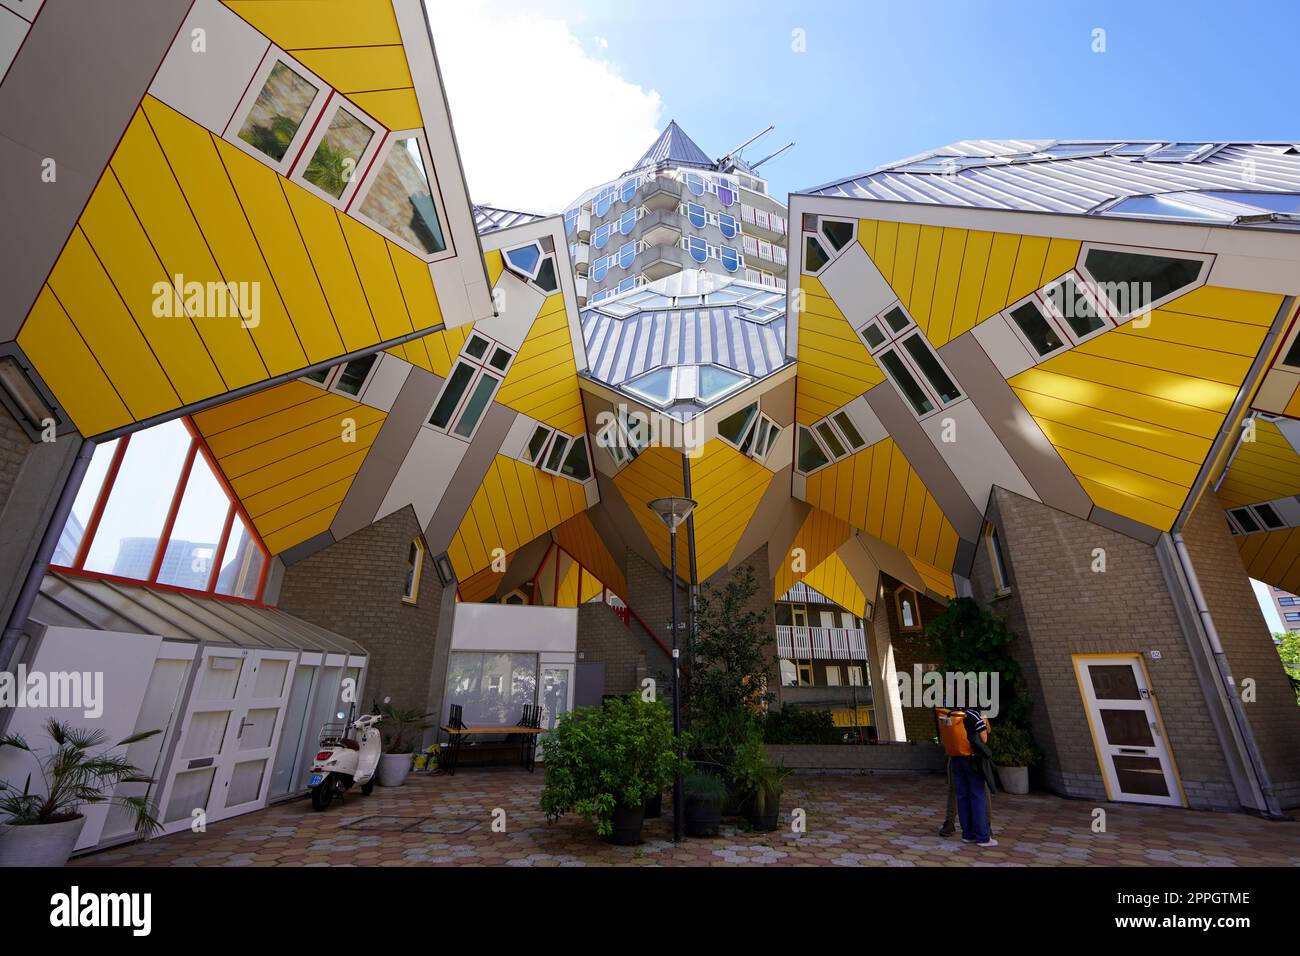 ROTTERDAM, NETHERLANDS - JUNE 9, 2022: Cube Houses and Blaak tower in Rotterdam, Netherlands Stock Photo